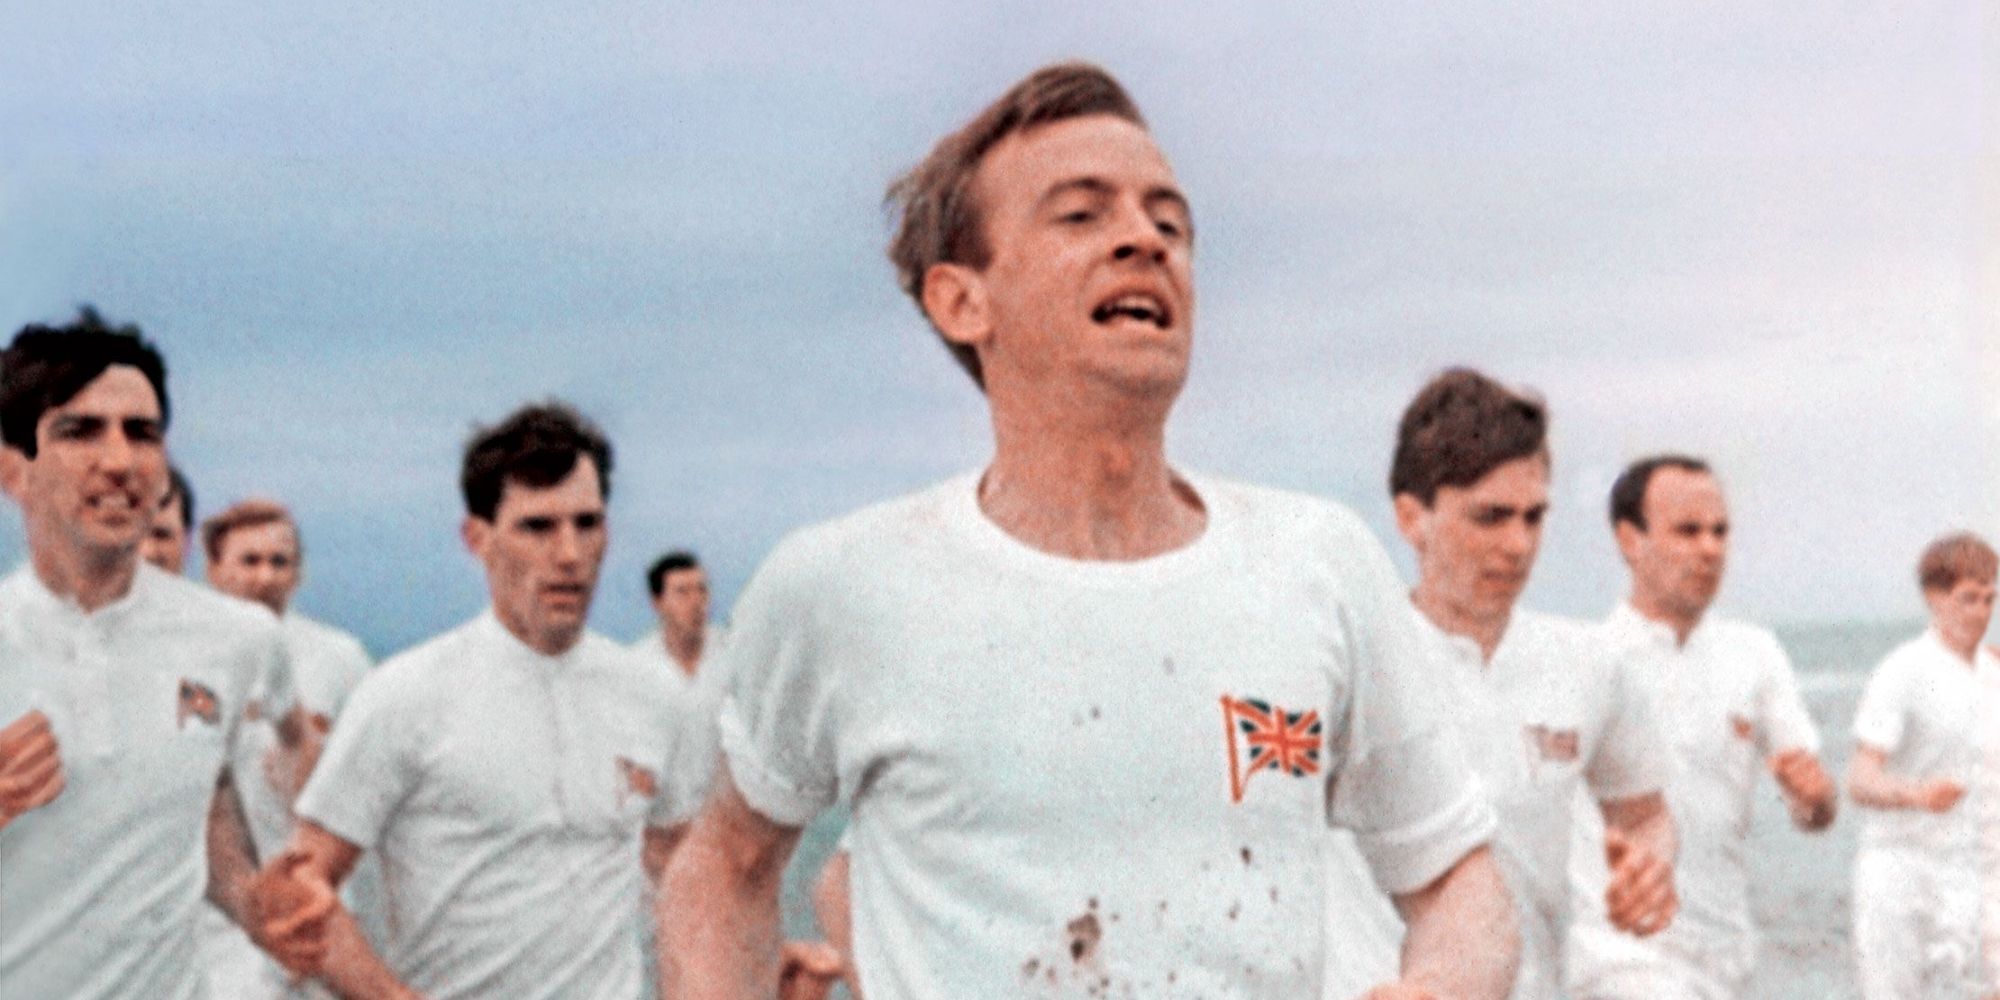 Runners on the beach in Chariots of Fire